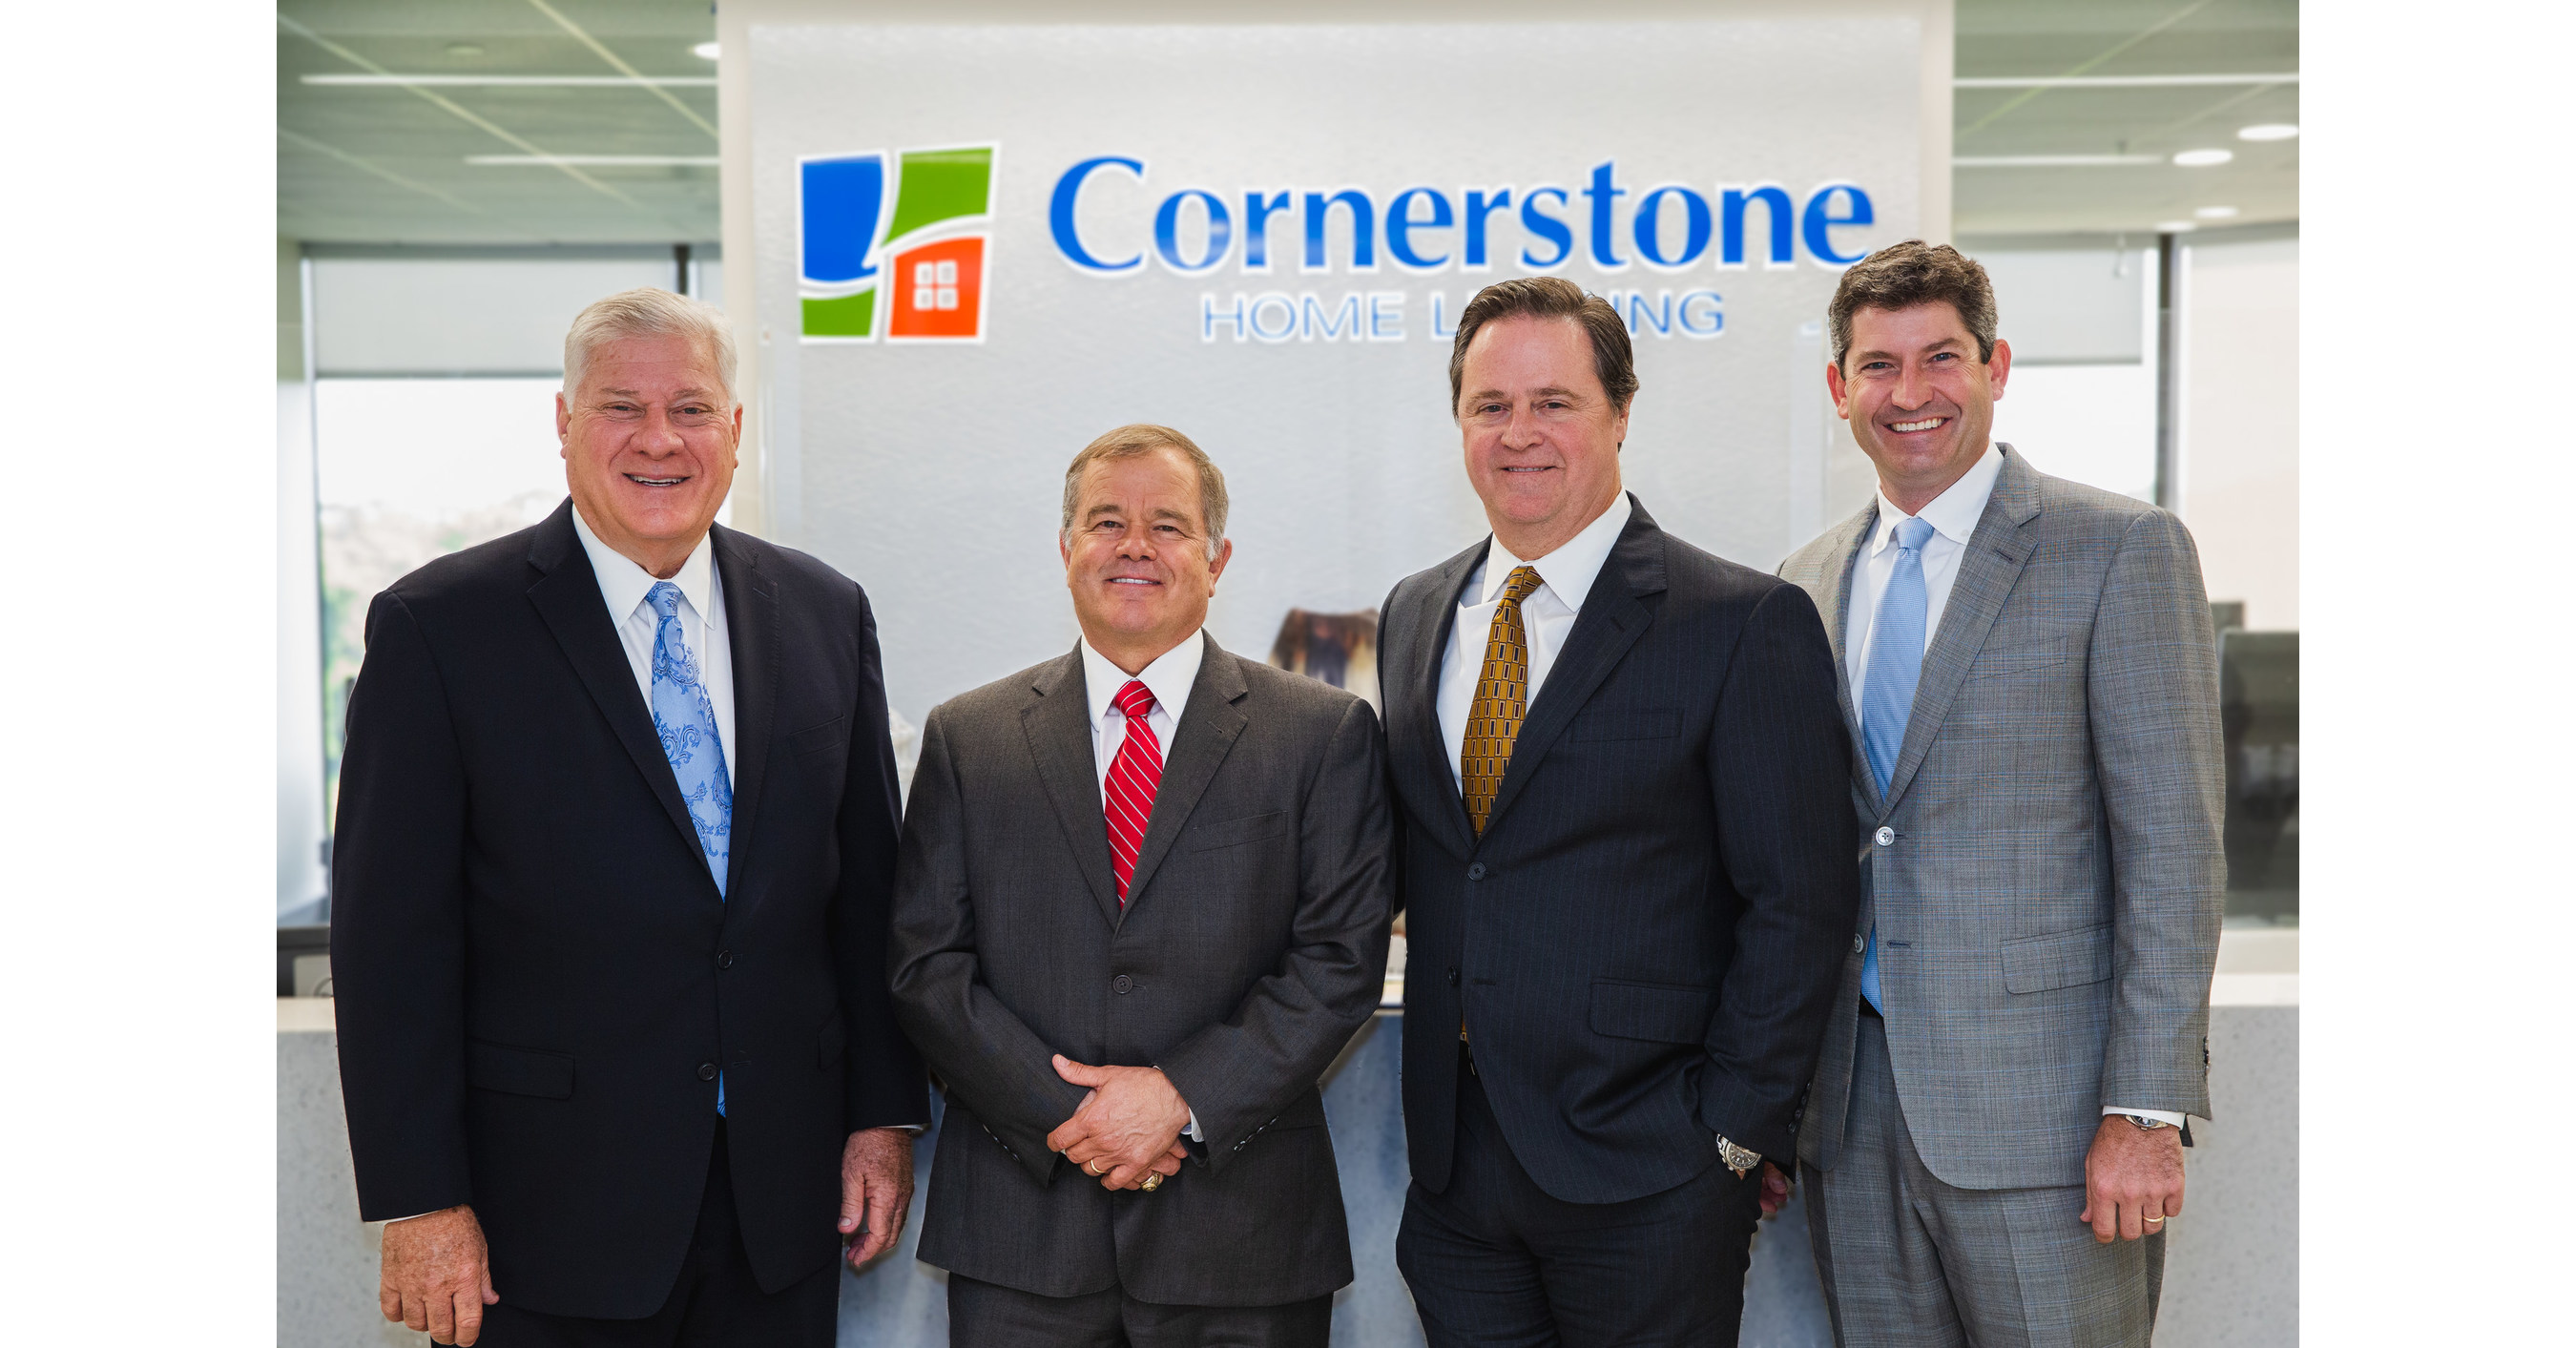 Cornerstone Home Lending Completes Acquisition of The Roscoe State Bank